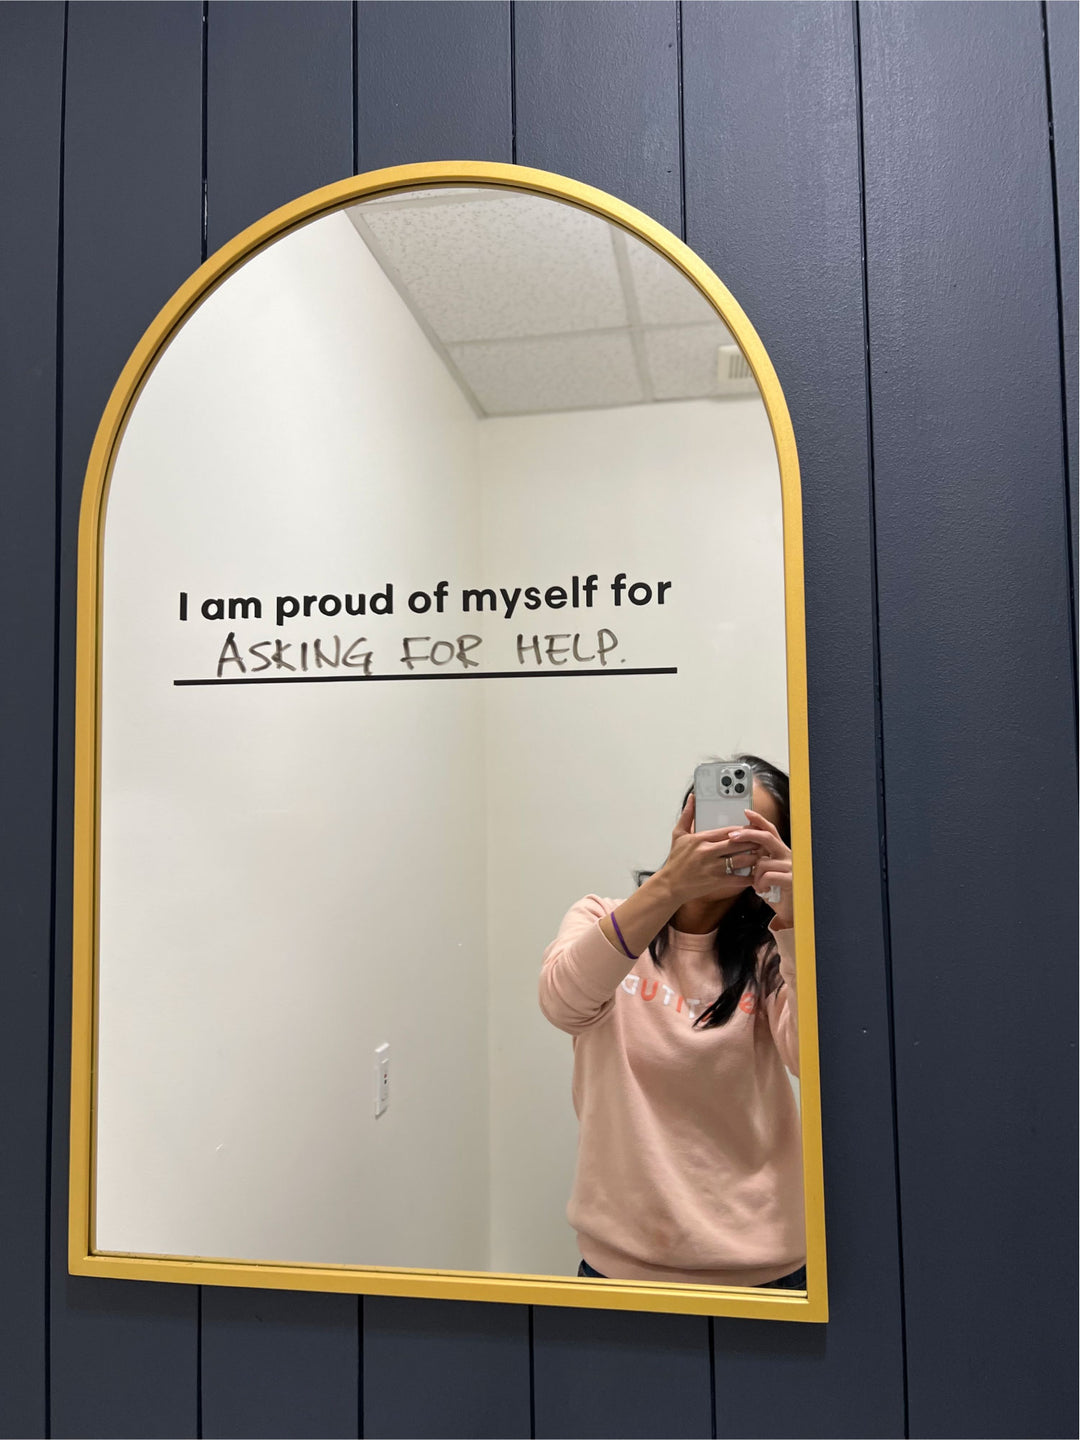 I am Proud of Myself for | Writable Mirror Sticker